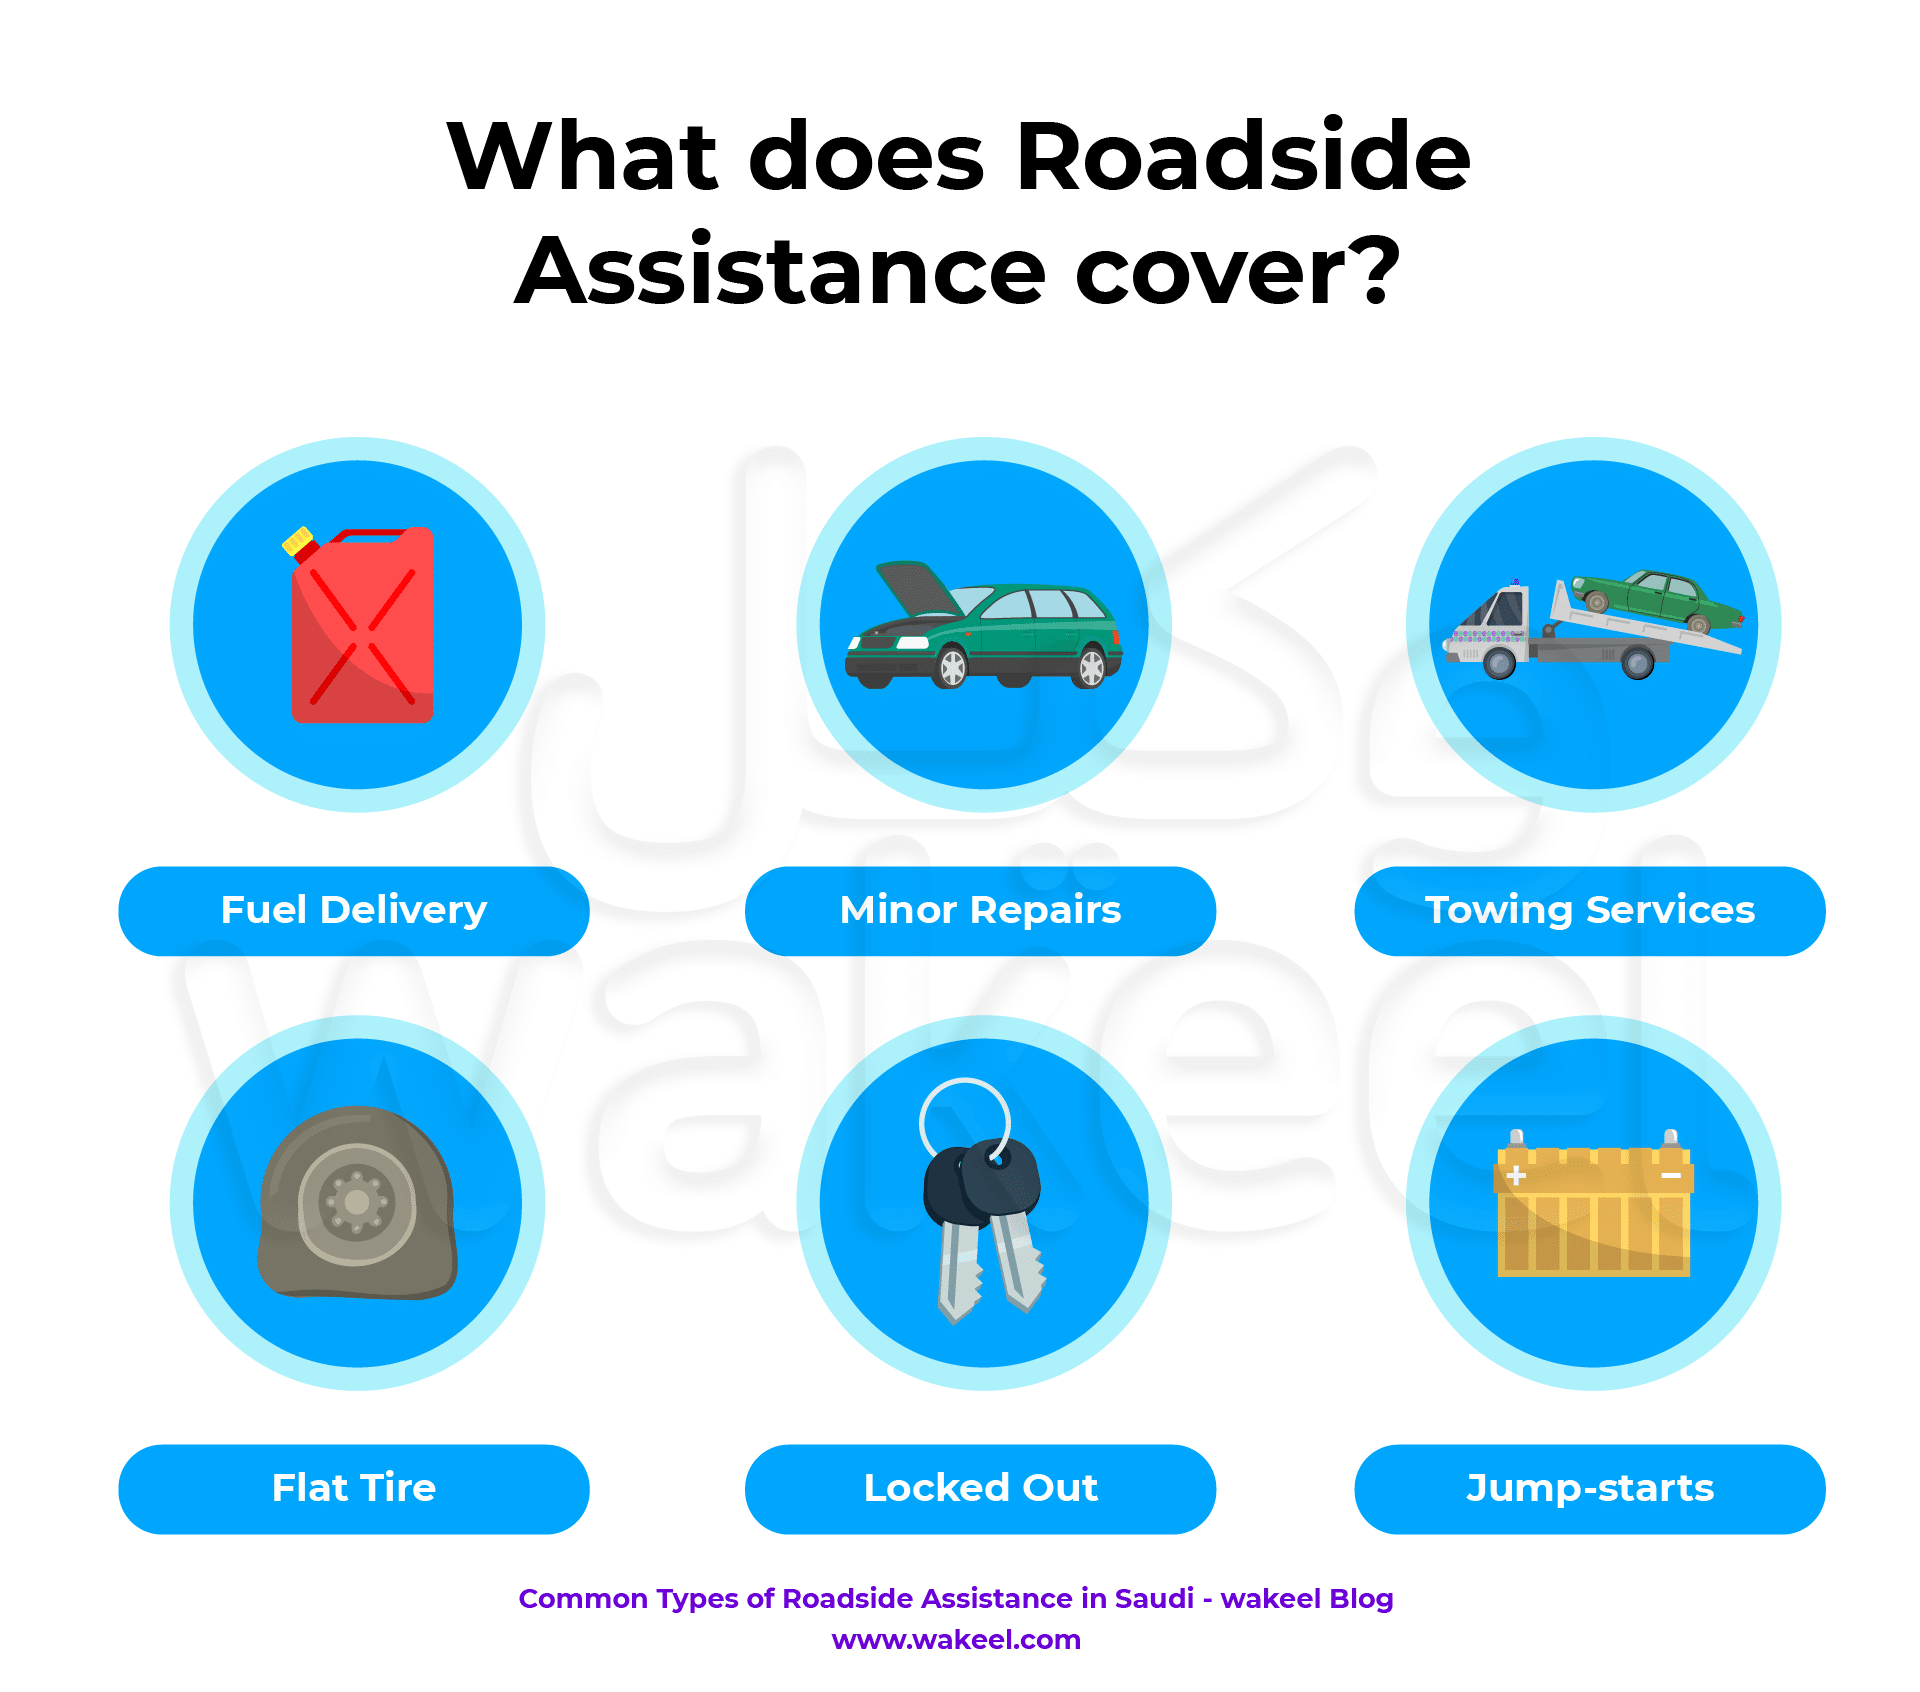 Road side insurance covers Fuel, Minor repairs, towing services, Flat tire and battery jump starts in Saudi Arabia.